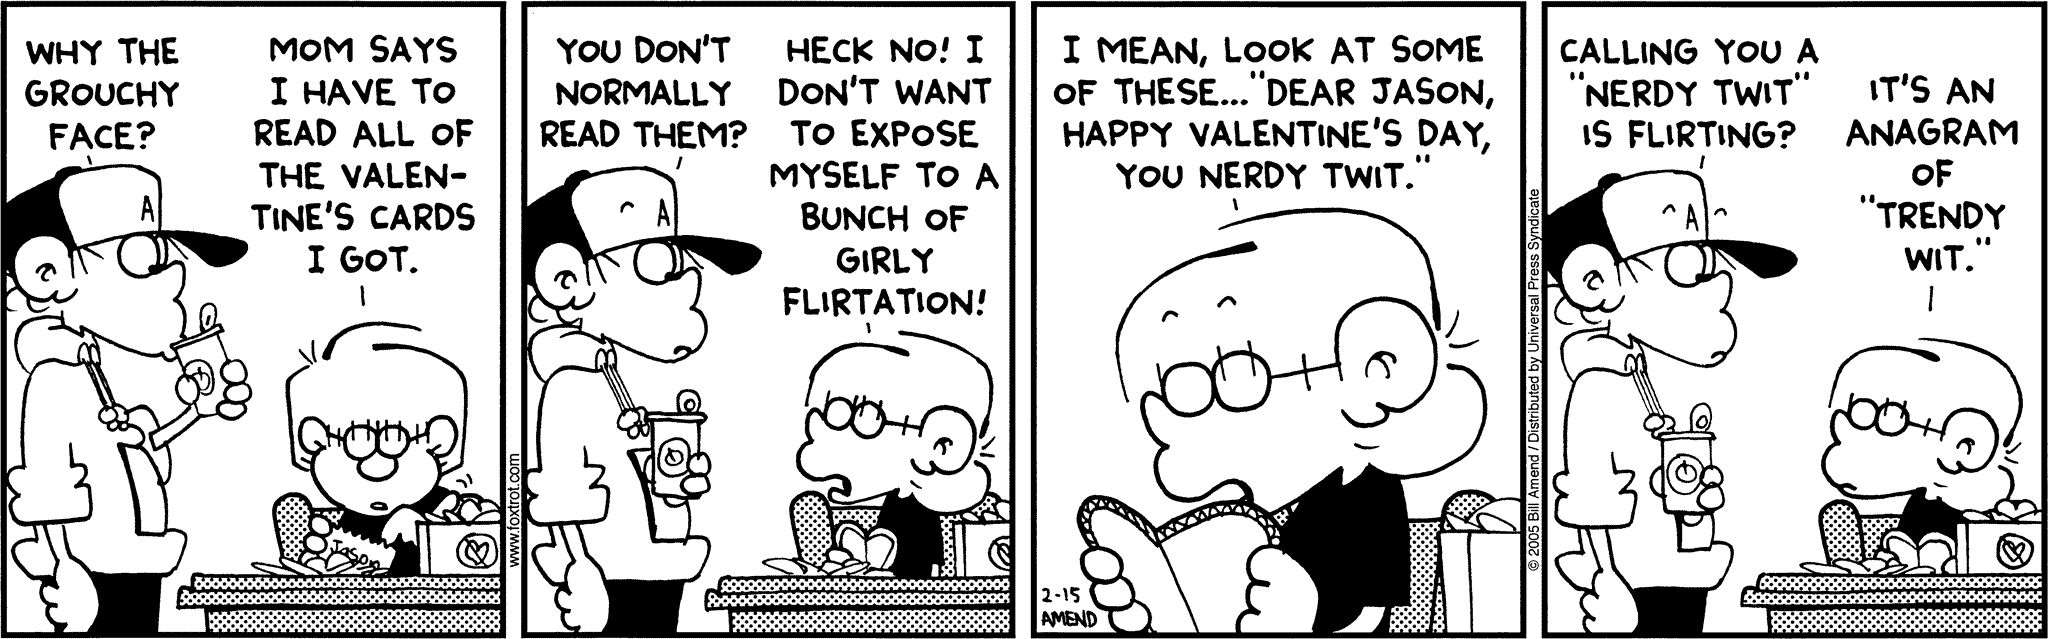 FoxTrot by Bill Amend - Peter: Why the grouchy face? Jason: Mom says I have to read all of the Valentine's cards I got. Peter: You don't normally read them? Jason: Heck no! I don't want to expose myself to a bunch of girly flirtation! I mean, look at some of these... "Dear Jason, Happy Valentine's Day, you nerdy twit." Peter: Calling you a "nerdy twit" is flirting? Jason: It's an anagram of "trendy wit."